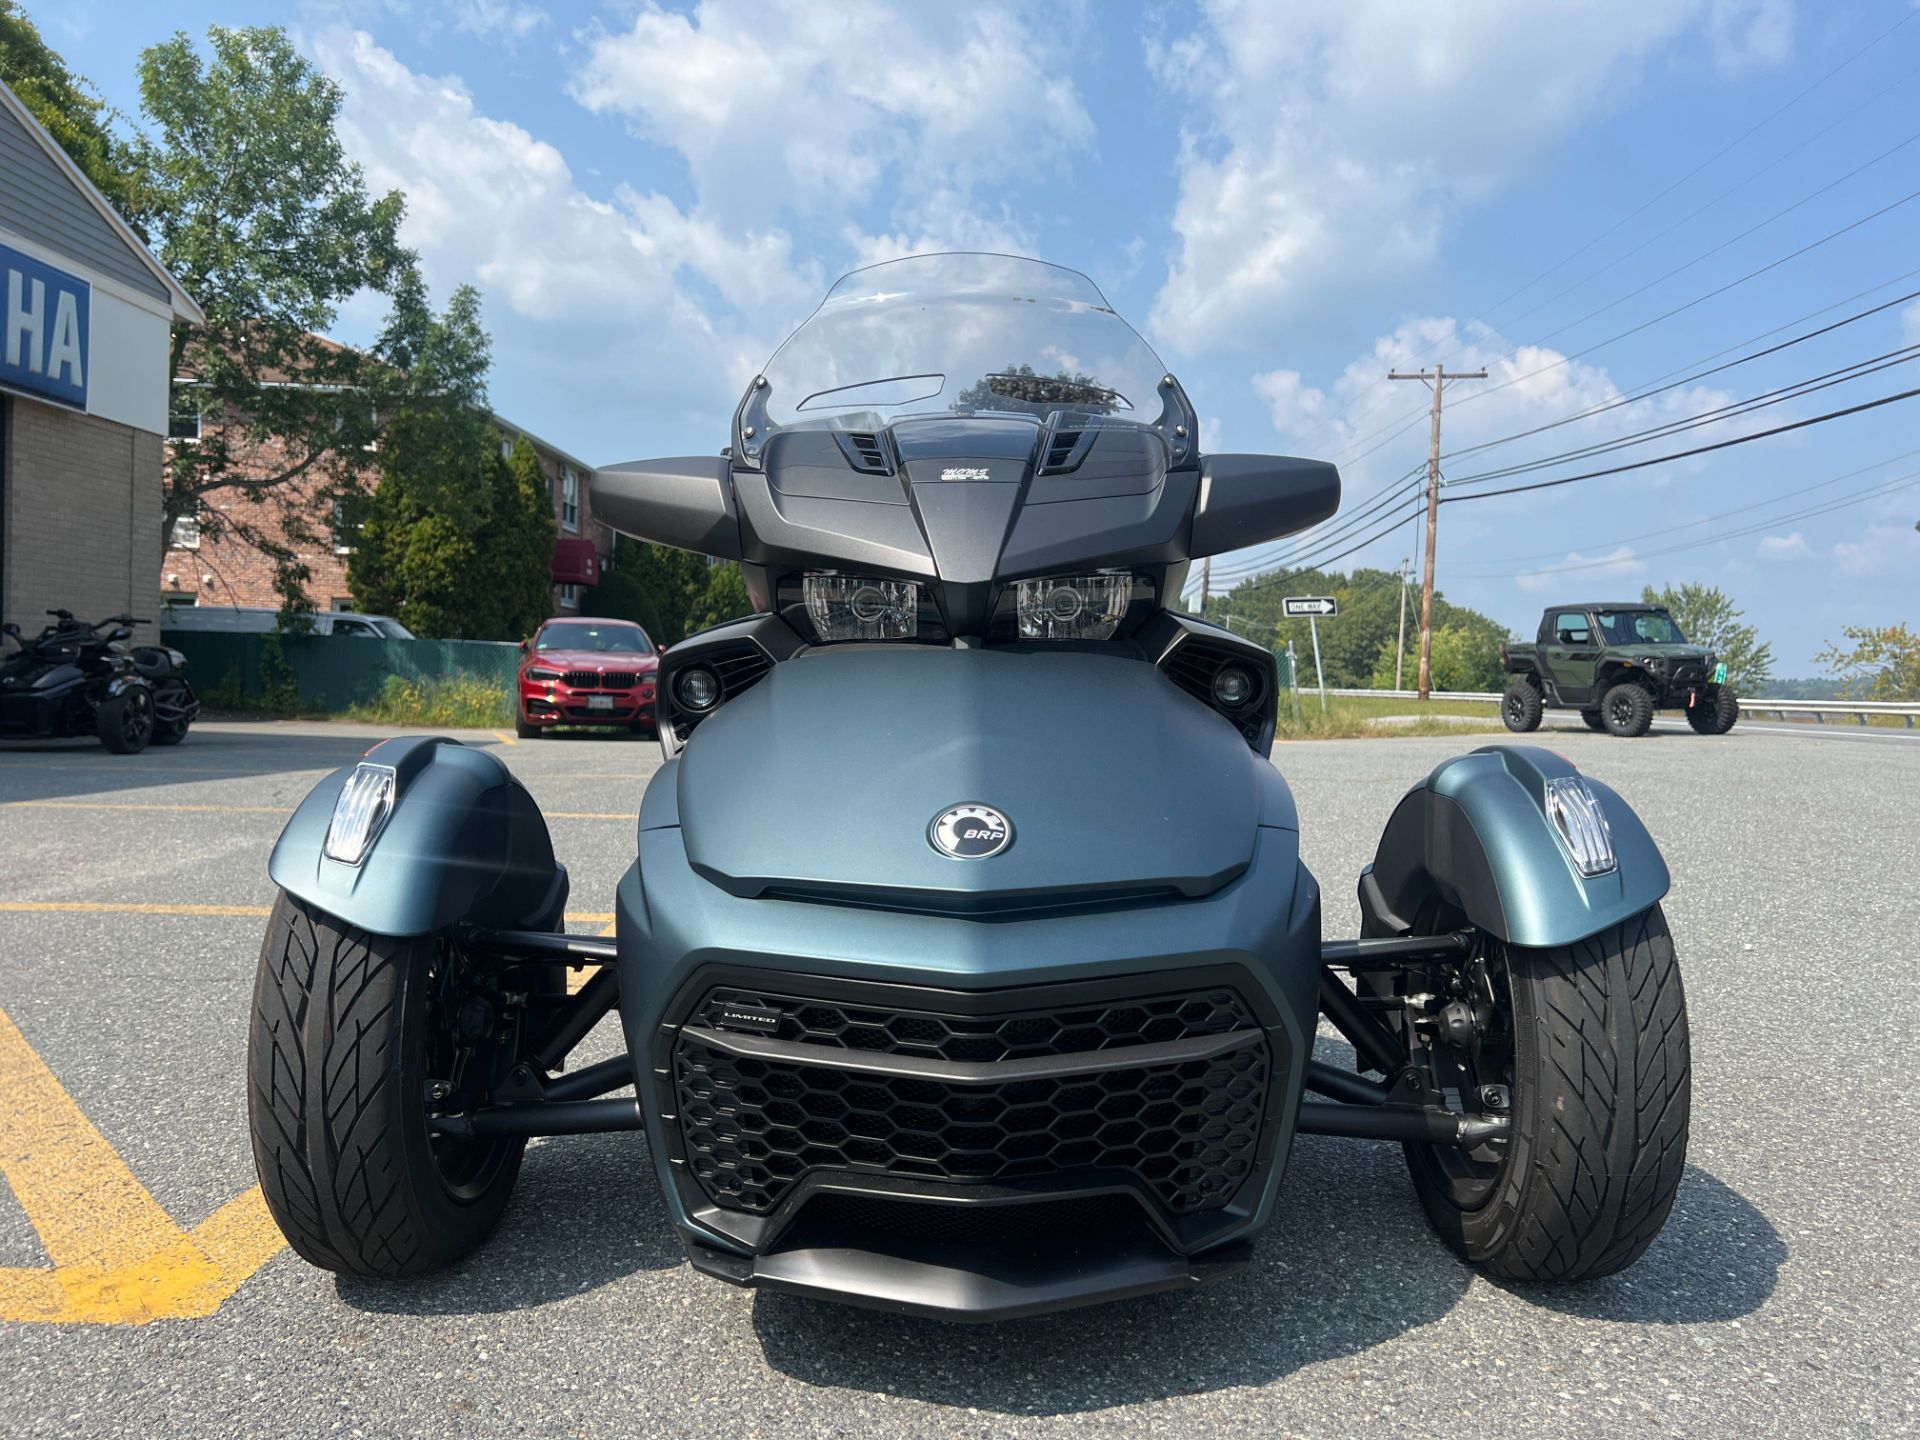 2023 Can-Am Spyder F3 Limited Special Series in North Chelmsford, Massachusetts - Photo 2